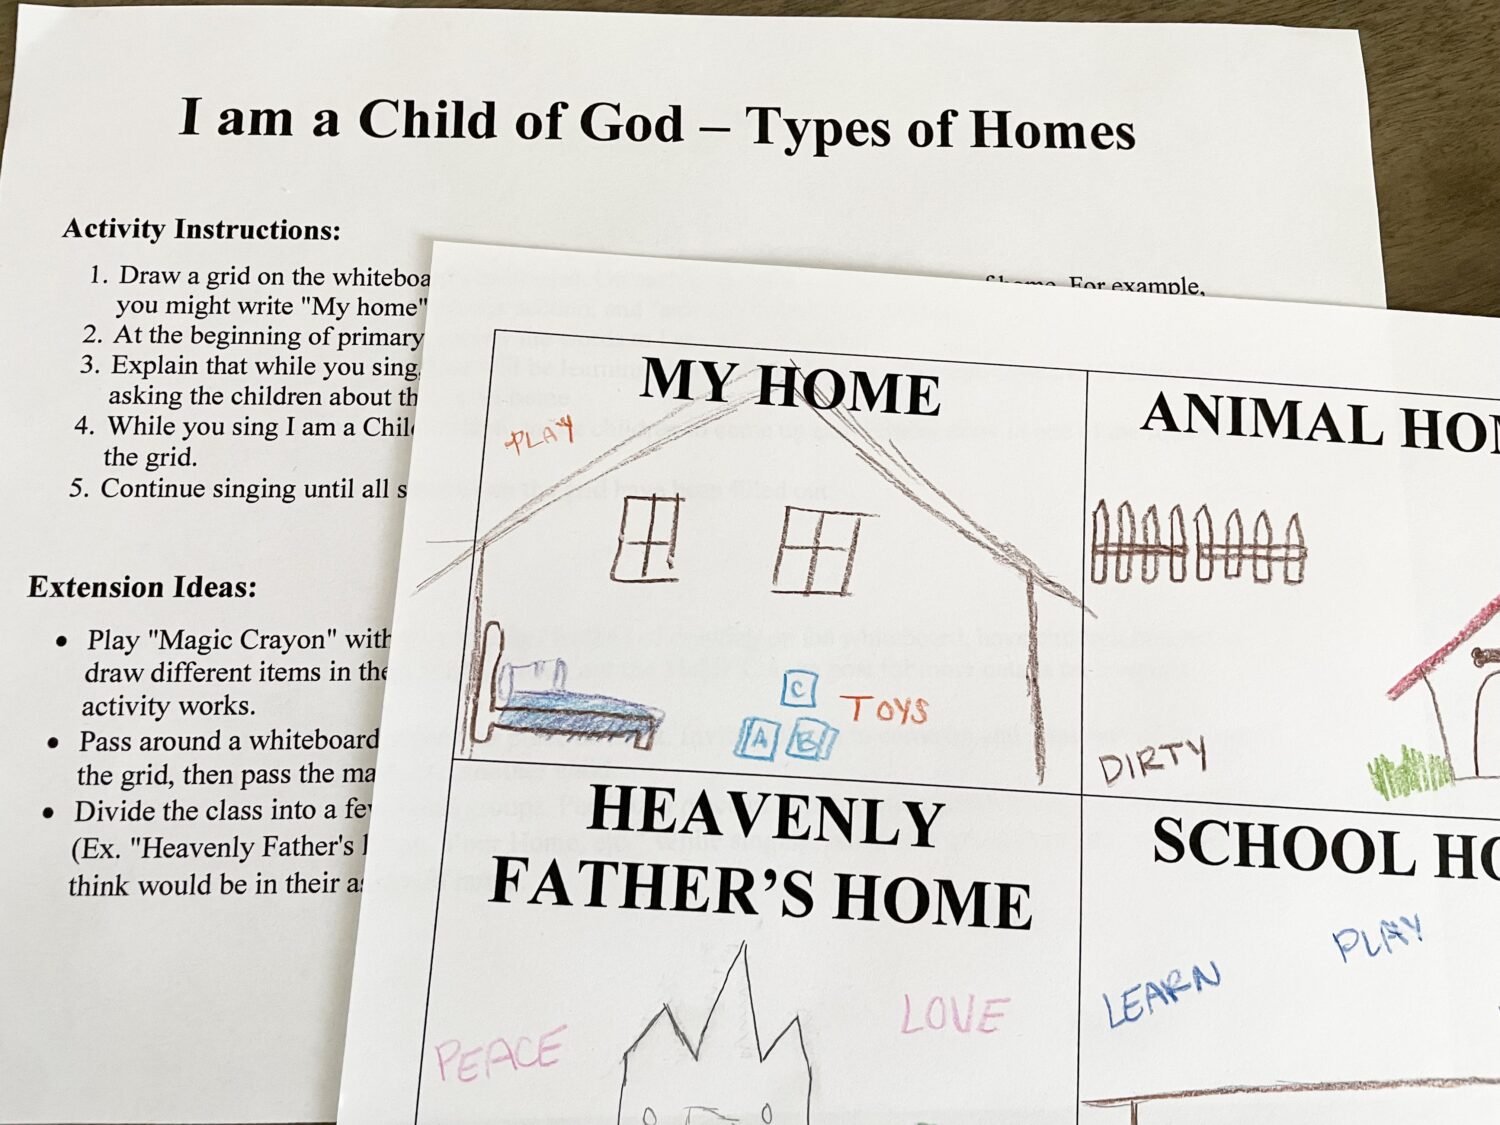 I am a Child of God - Types of Homes Easy ideas for Music Leaders IMG 6203 e1647554381397